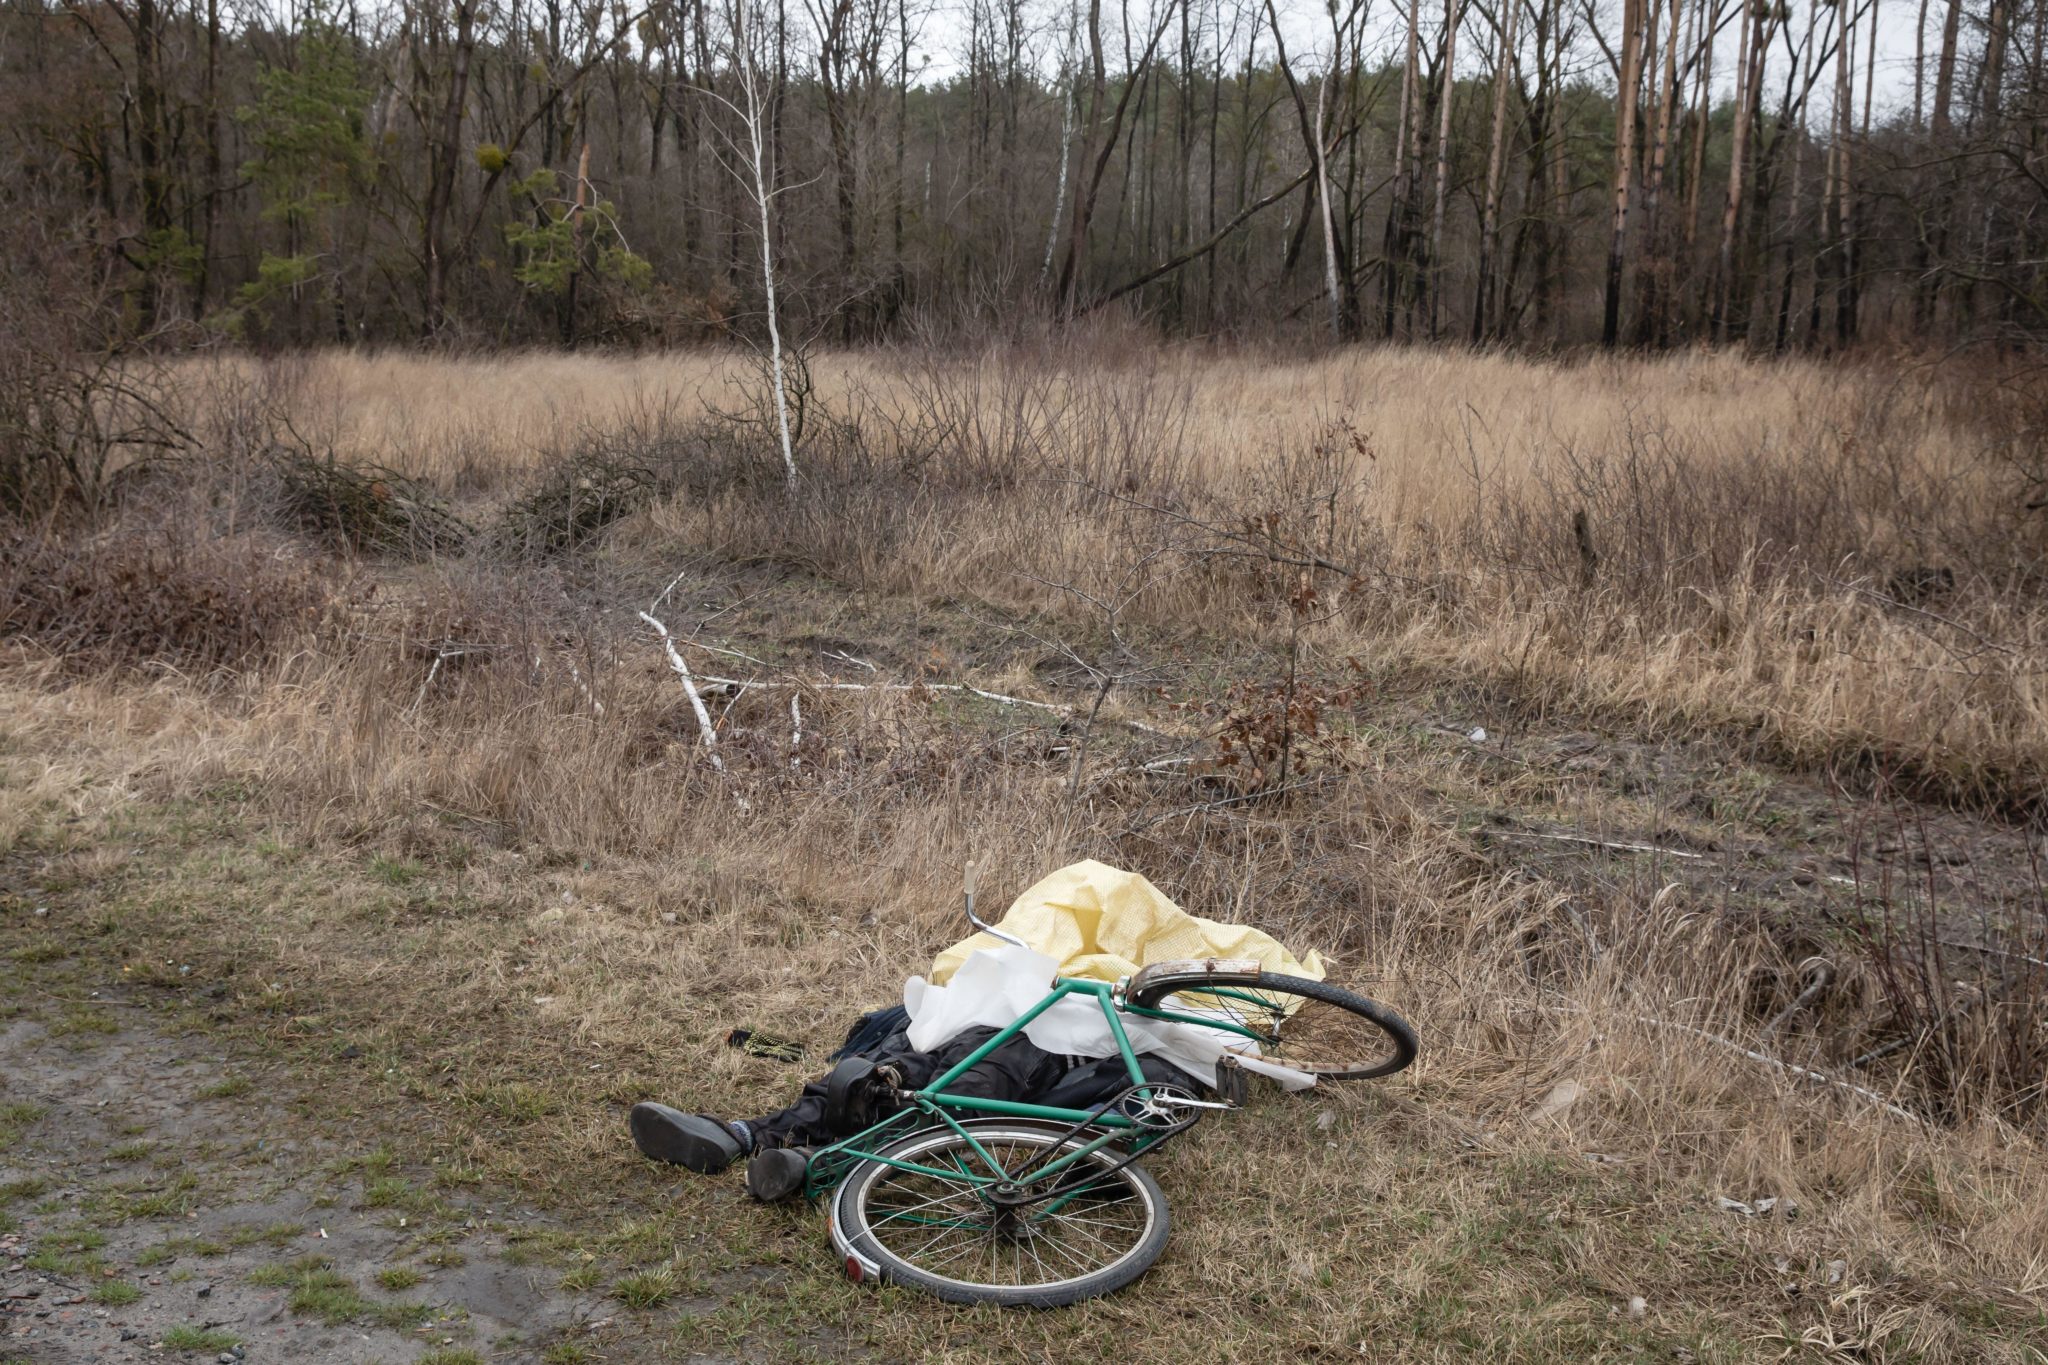 A dead civilian seen next to his bicycle on the side of the highway 20km from Kyiv, 02-04-2022. Image: ZUMA Press Inc / Alamy Stock Photo 